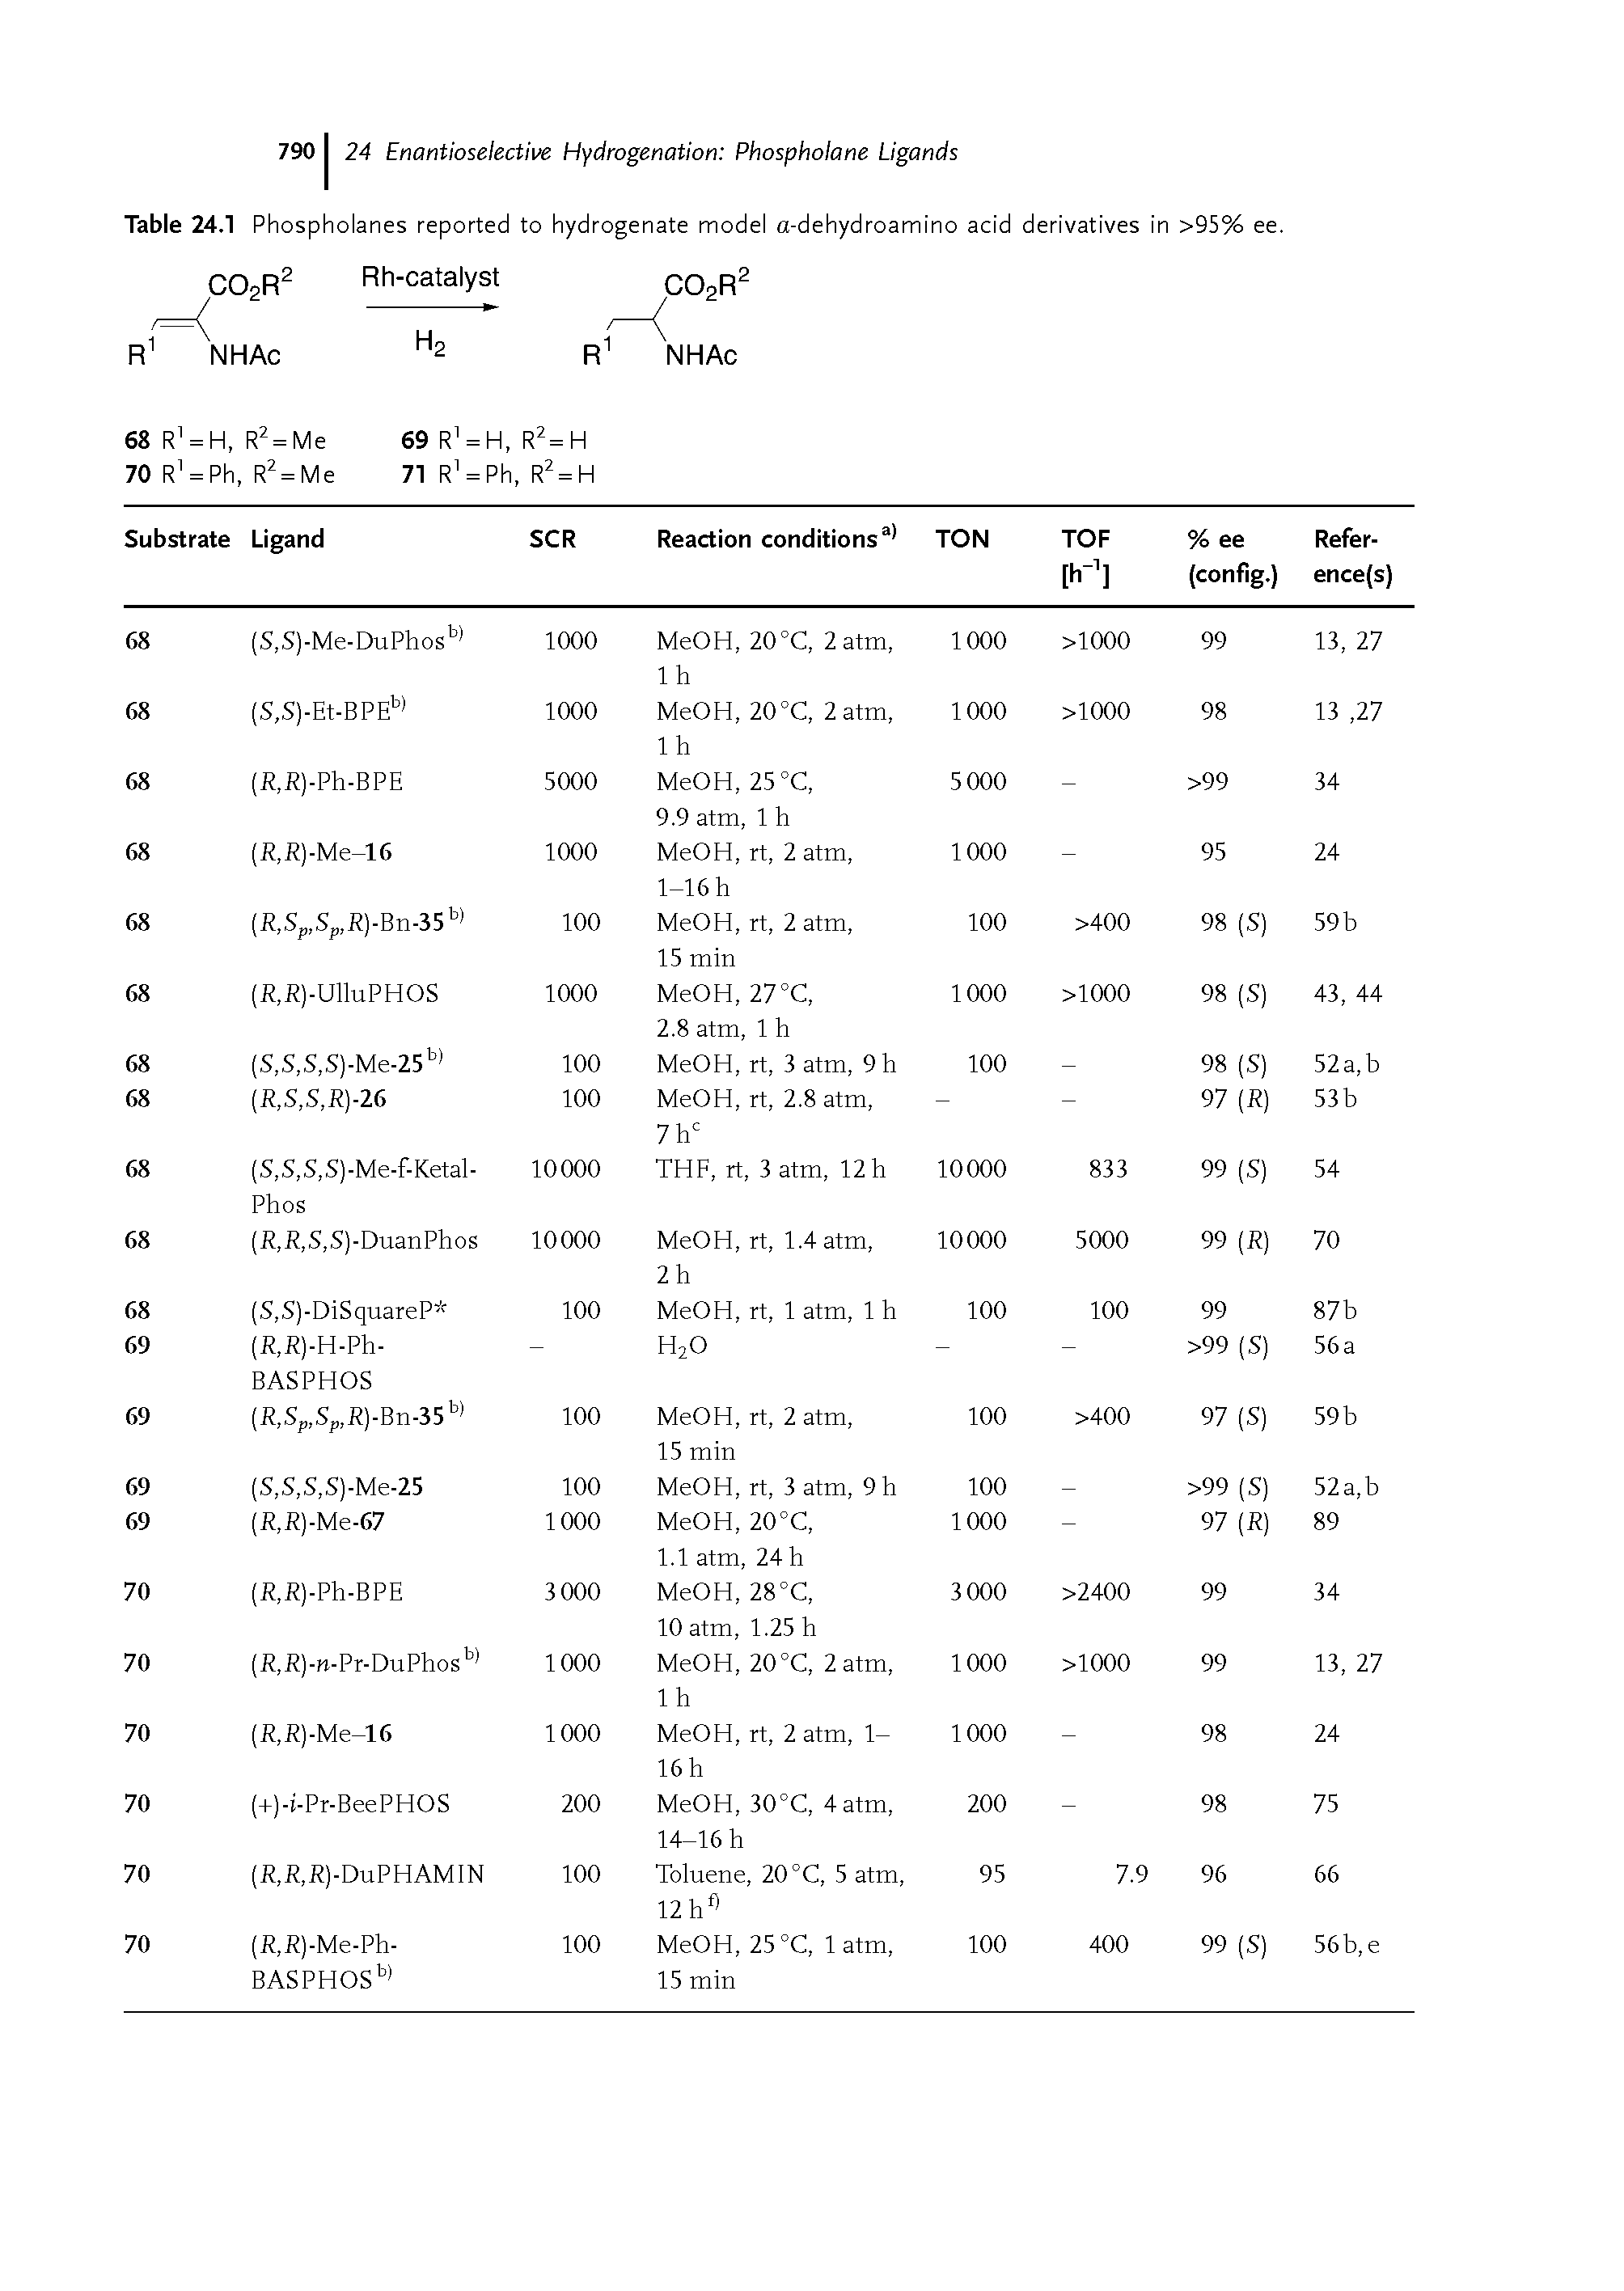 Table 24.1 Phospholanes reported to hydrogenate model a-dehydroamino acid derivatives in >95% ee.